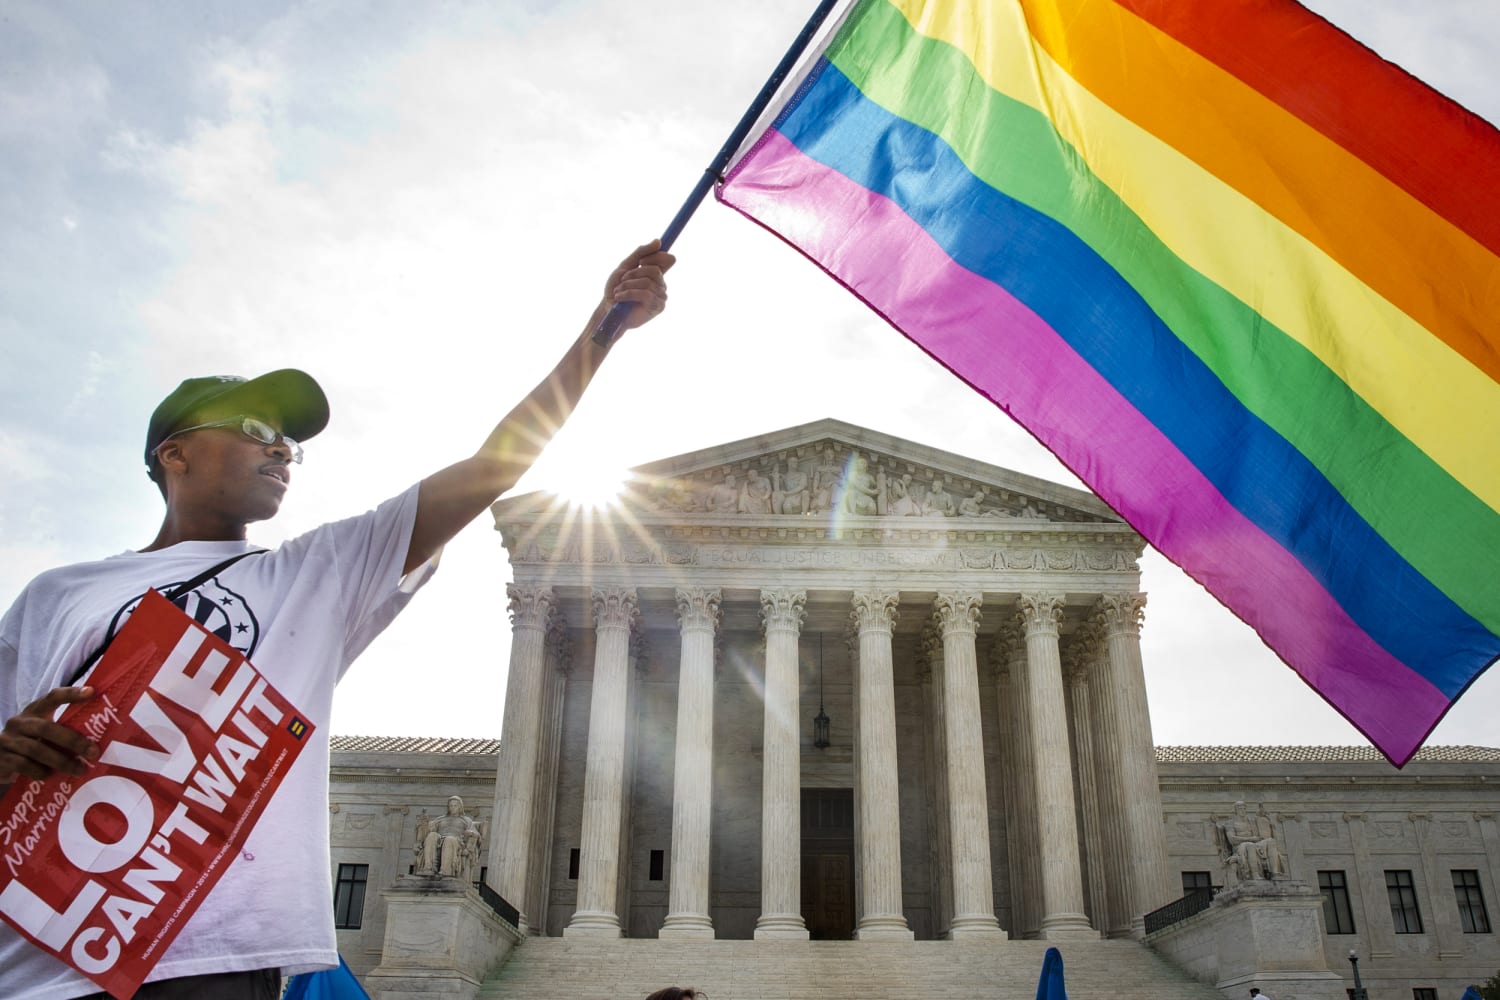 First Roe, next Obergefell? Some states look to pass same-sex marriage into law